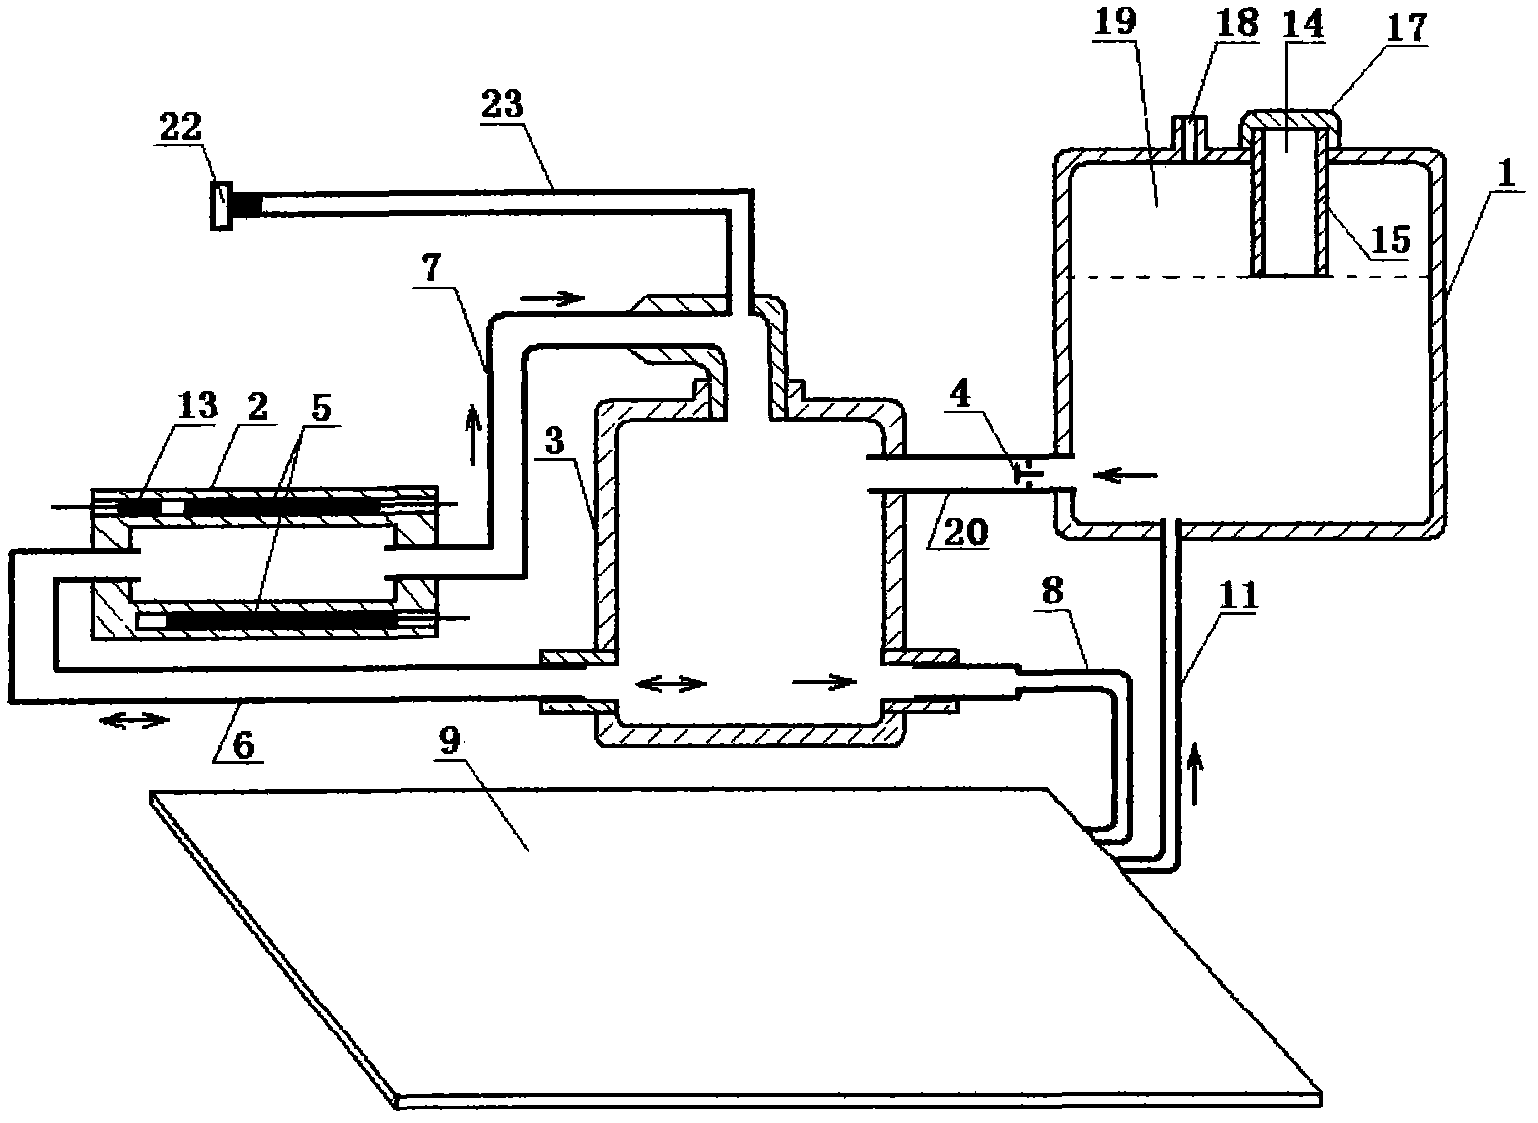 Heat energy water circulation system